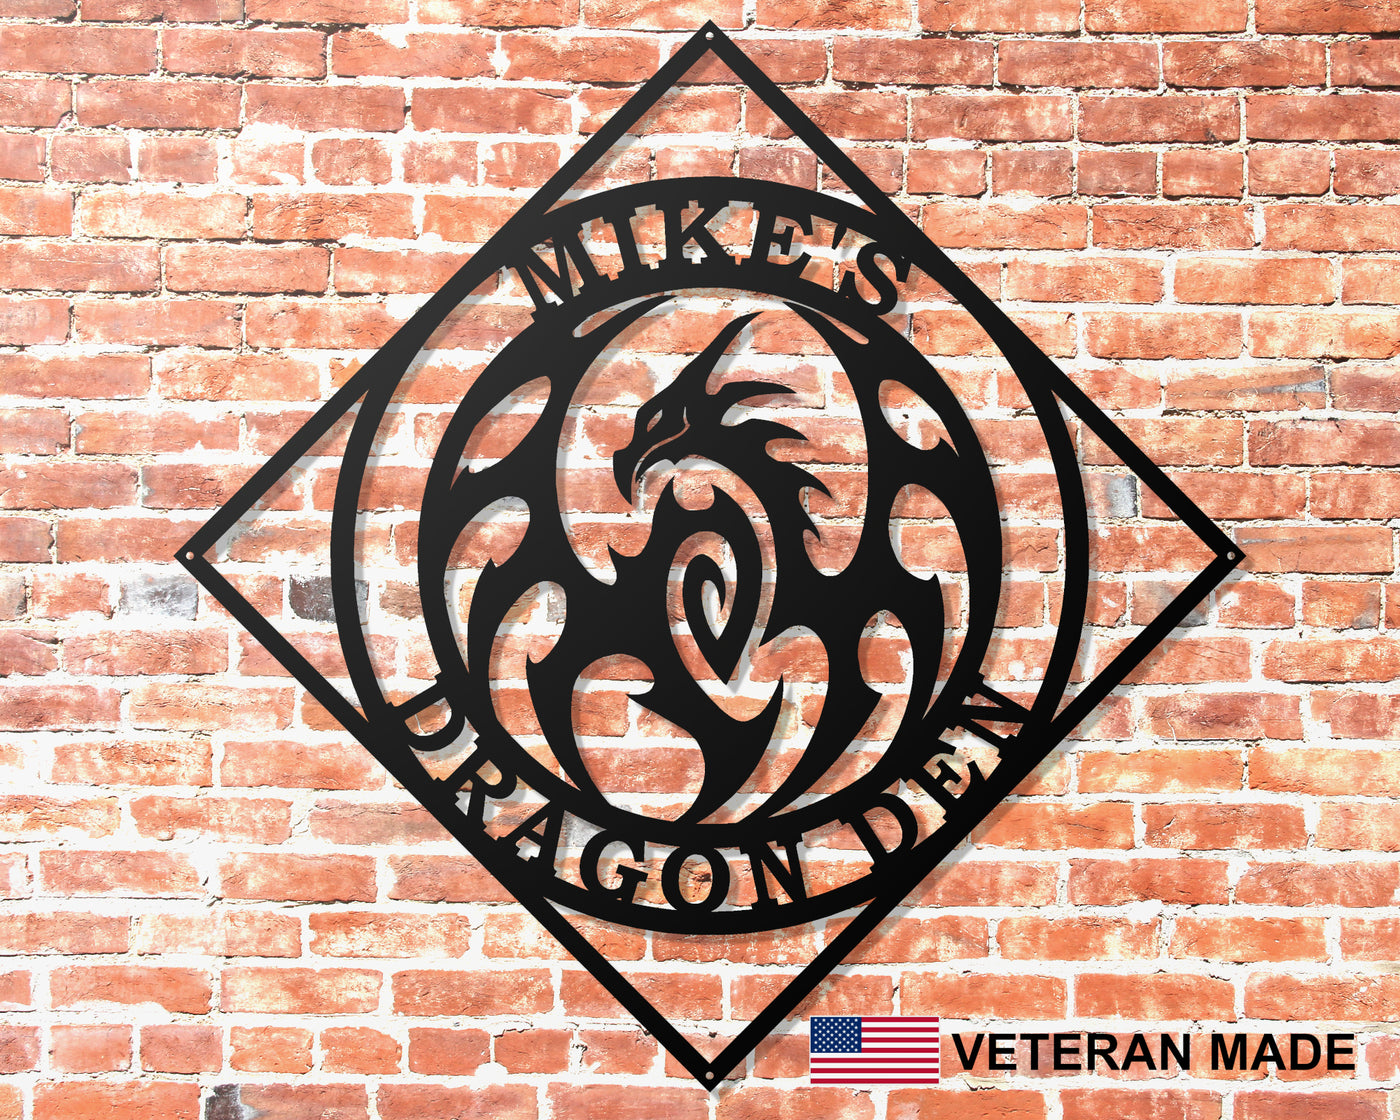 Personalized Dragon Metal Sign - Madison Iron and Wood - Personalized sign - metal outdoor decor - Steel deocrations - american made products - veteran owned business products - fencing decorations - fencing supplies - custom wall decorations - personalized wall signs - steel - decorative post caps - steel post caps - metal post caps - brackets - structural brackets - home improvement - easter - easter decorations - easter gift - easter yard decor